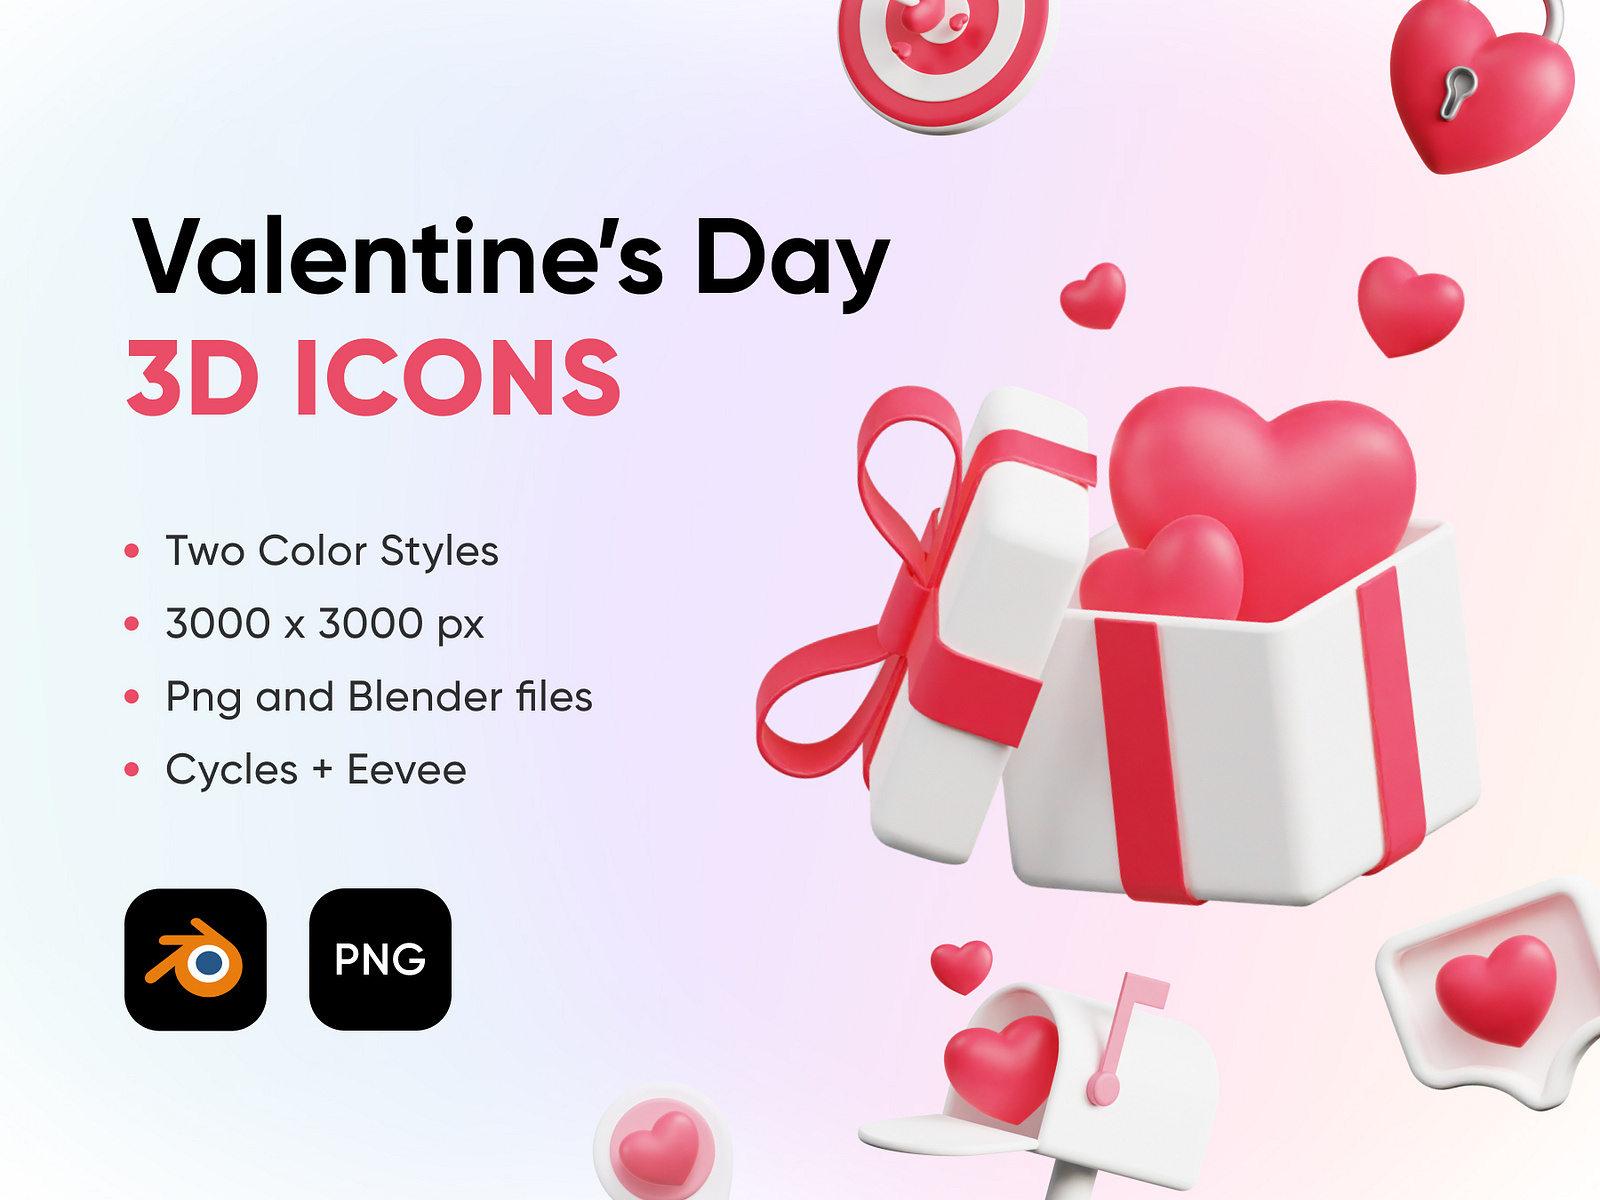 851,338 Valentines Day Icons Images, Stock Photos, 3D objects, & Vectors